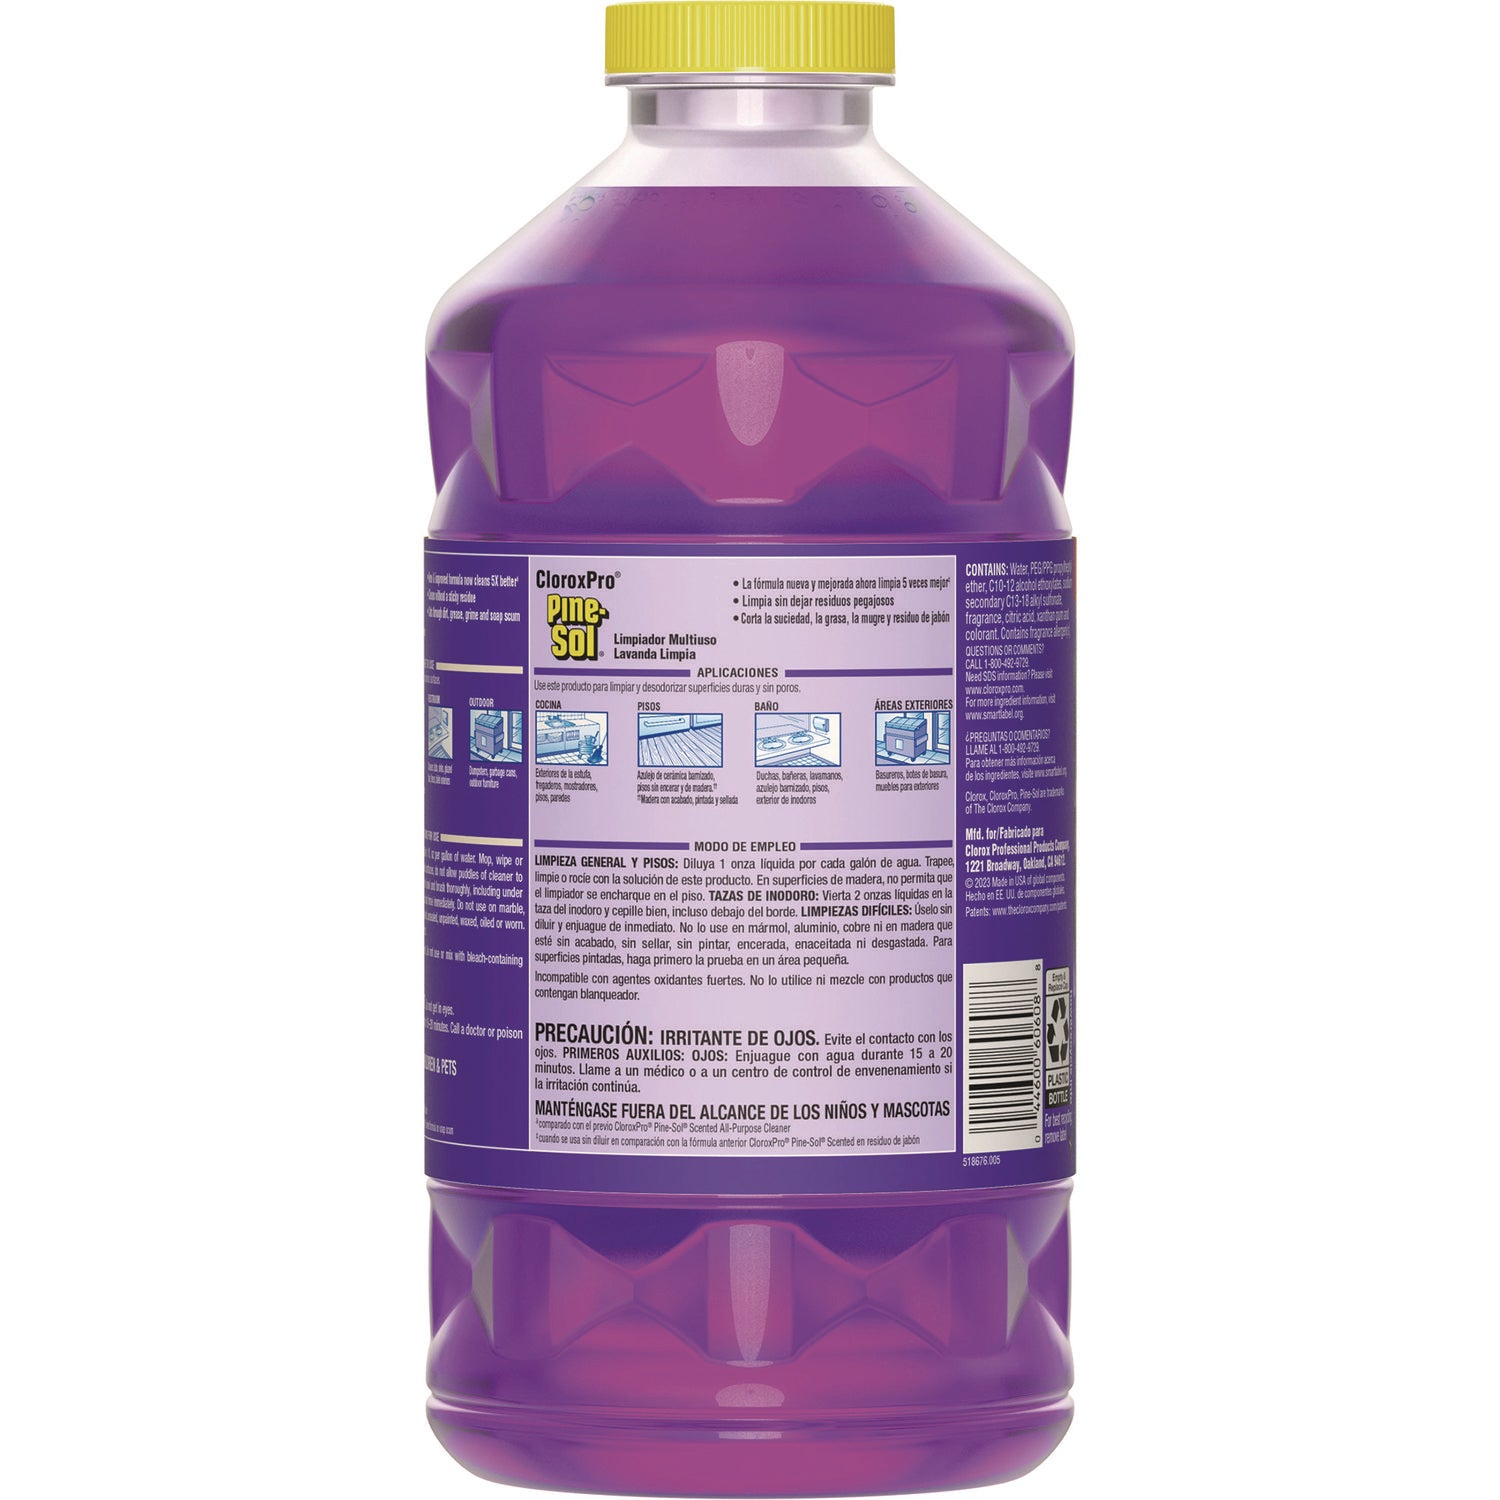 cloroxpro-multi-surface-cleaner-concentrated-lavender-clean-scent-80-oz-bottle_clo60608ea - 2